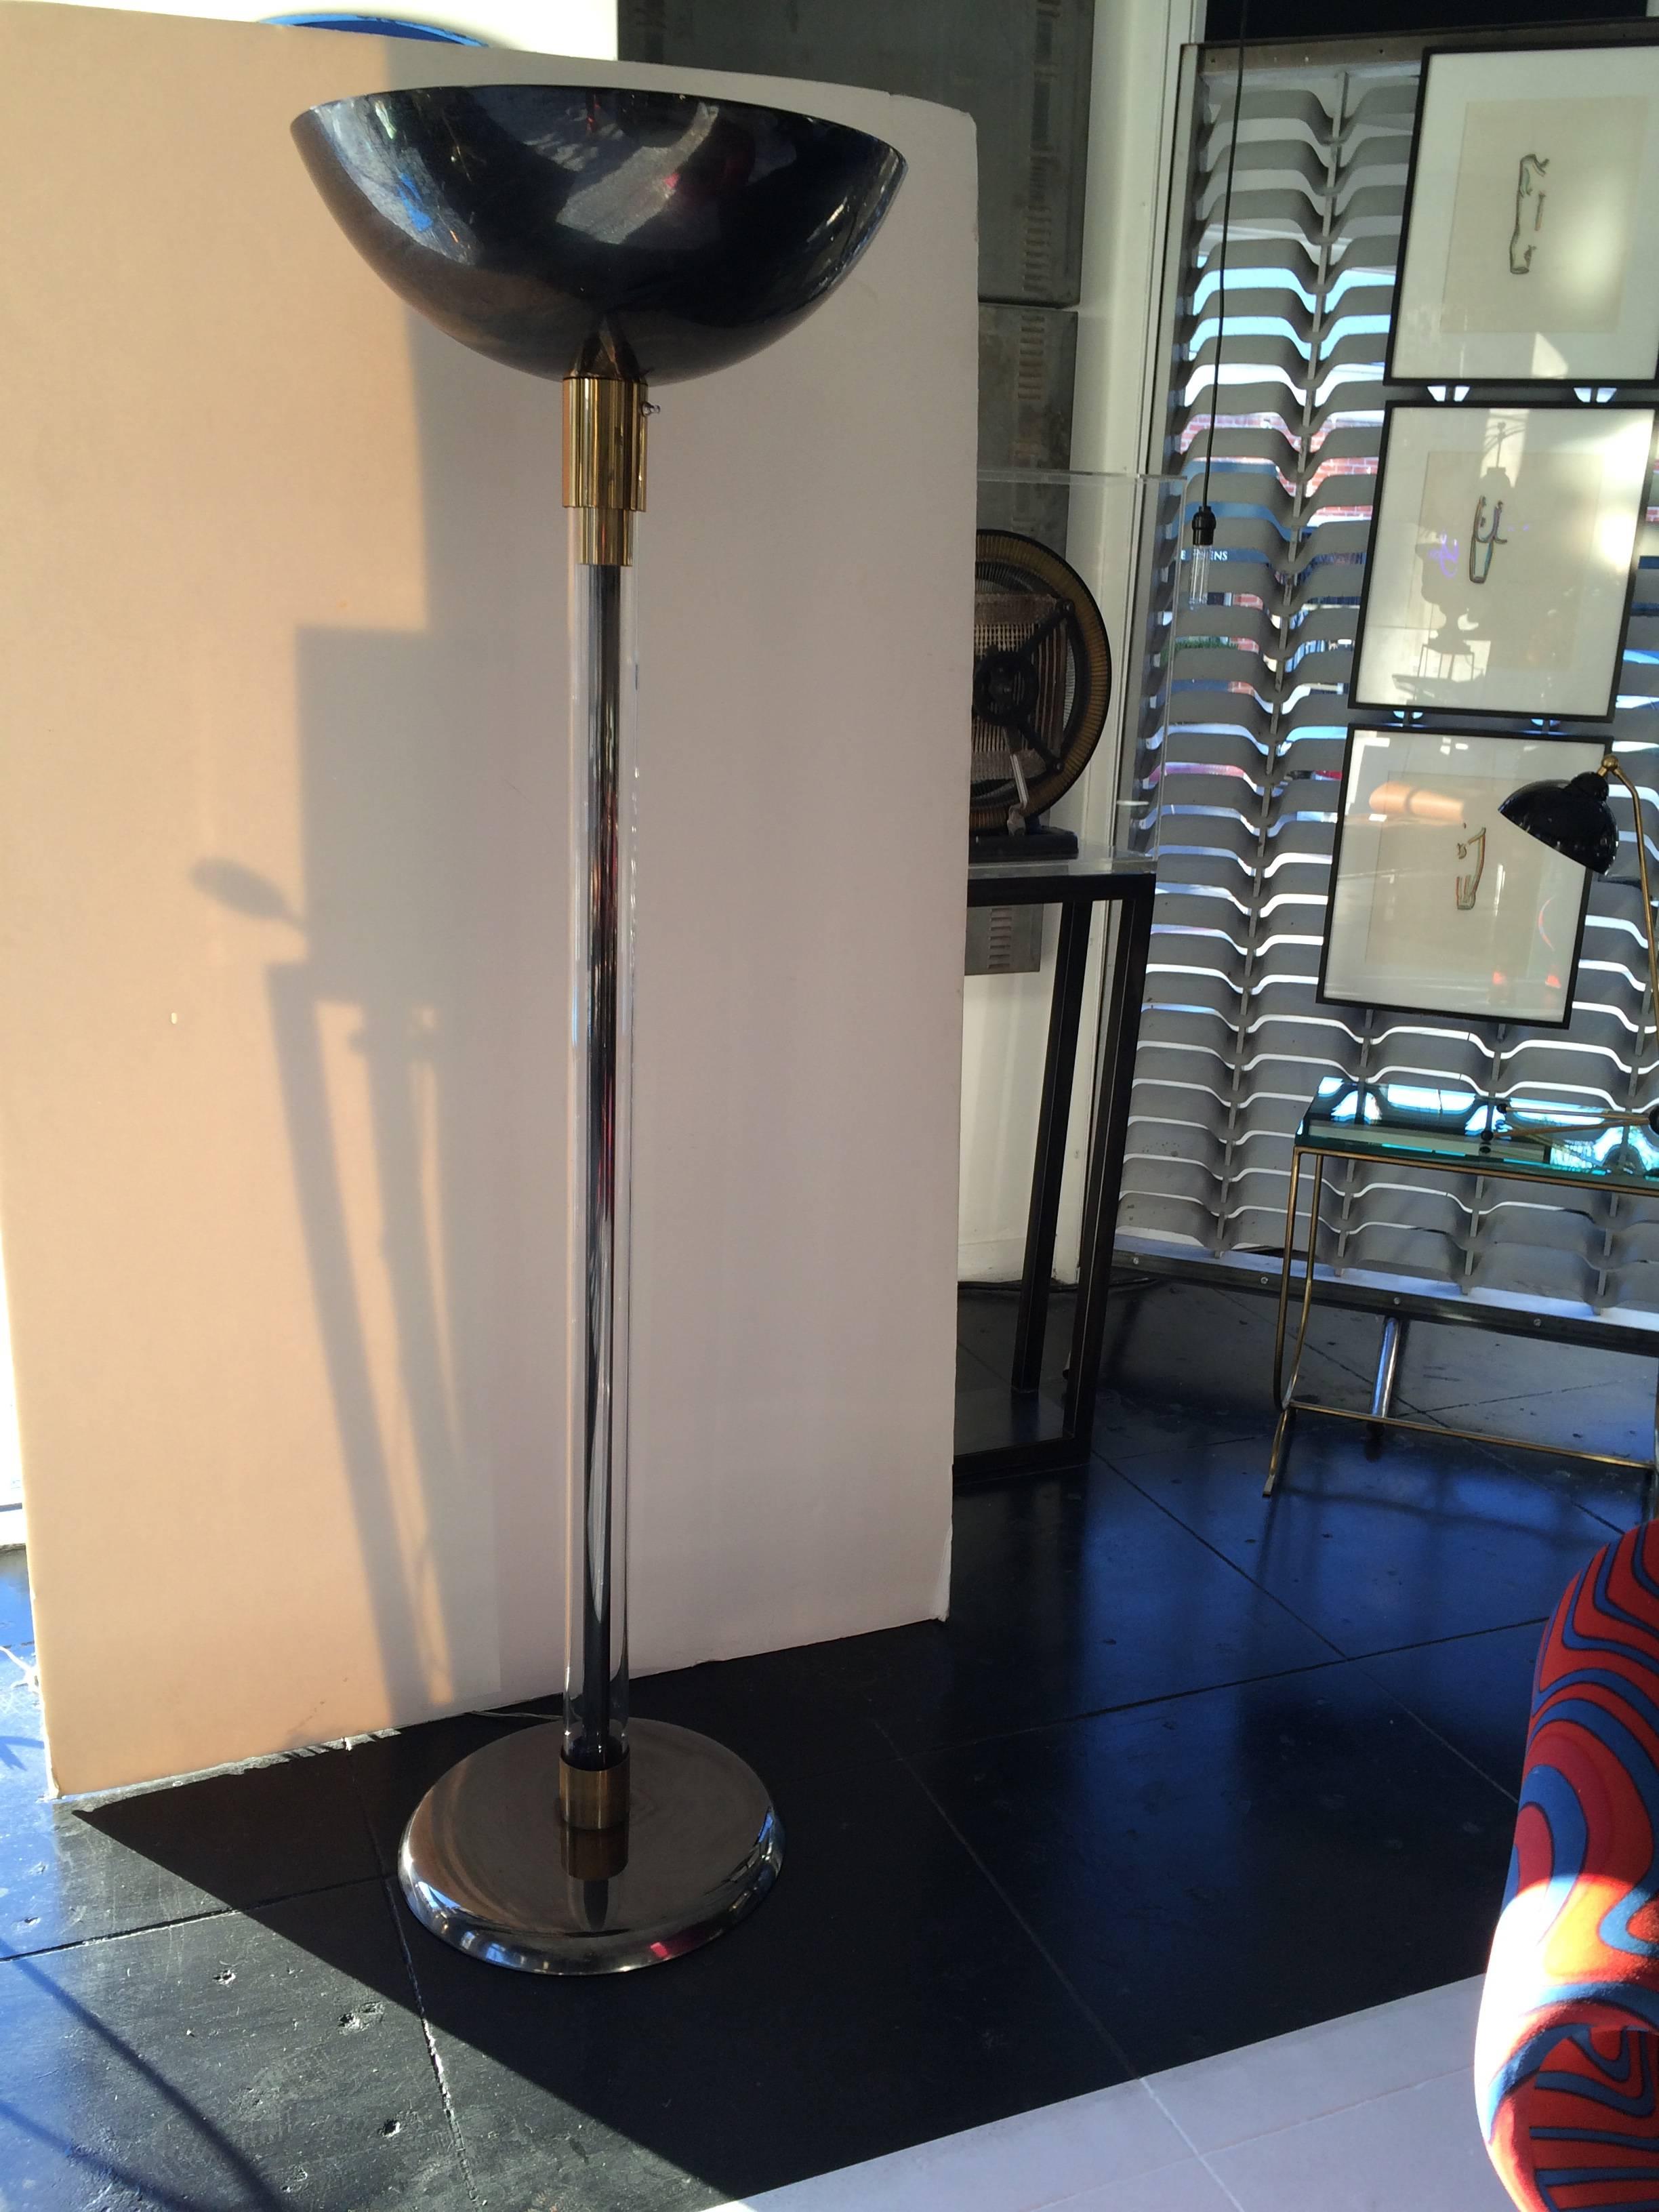 Amazing and rare floor lamp by Karl Springer, American, 1970s.
Gunmetal finish highlighted with a bronze finish. The gunmetal stem is covered in Lucite.